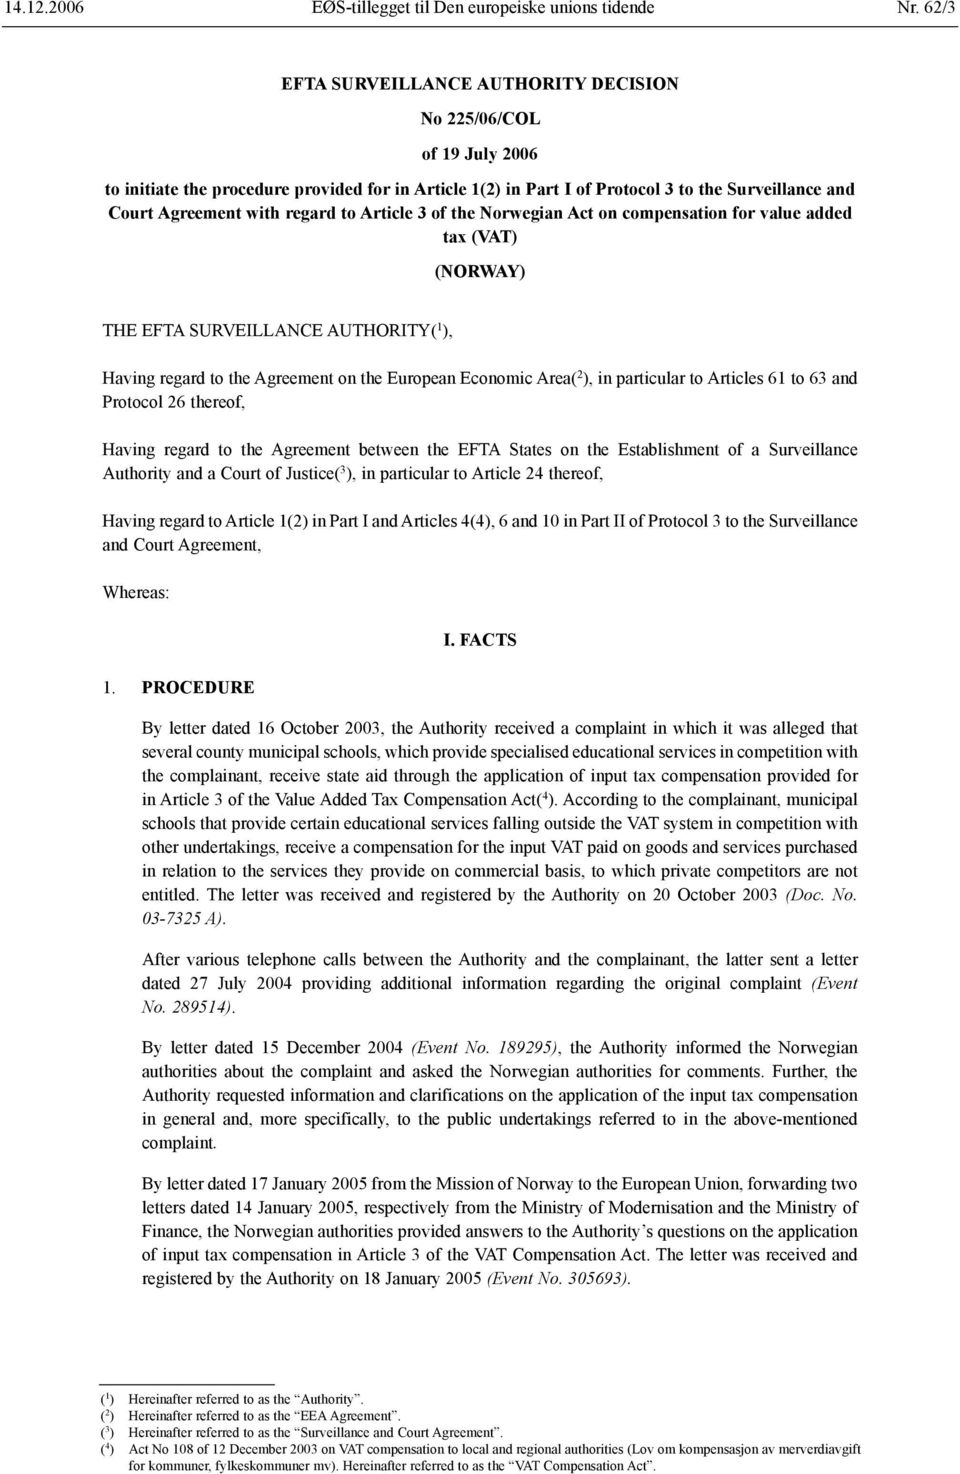 regard to Article 3 of the Norwegian Act on compensation for value added tax (VAT) (NORWAY) THE EFTA SURVEILLANCE AUTHORITY( 1 ), Having regard to the Agreement on the European Economic Area( 2 ), in